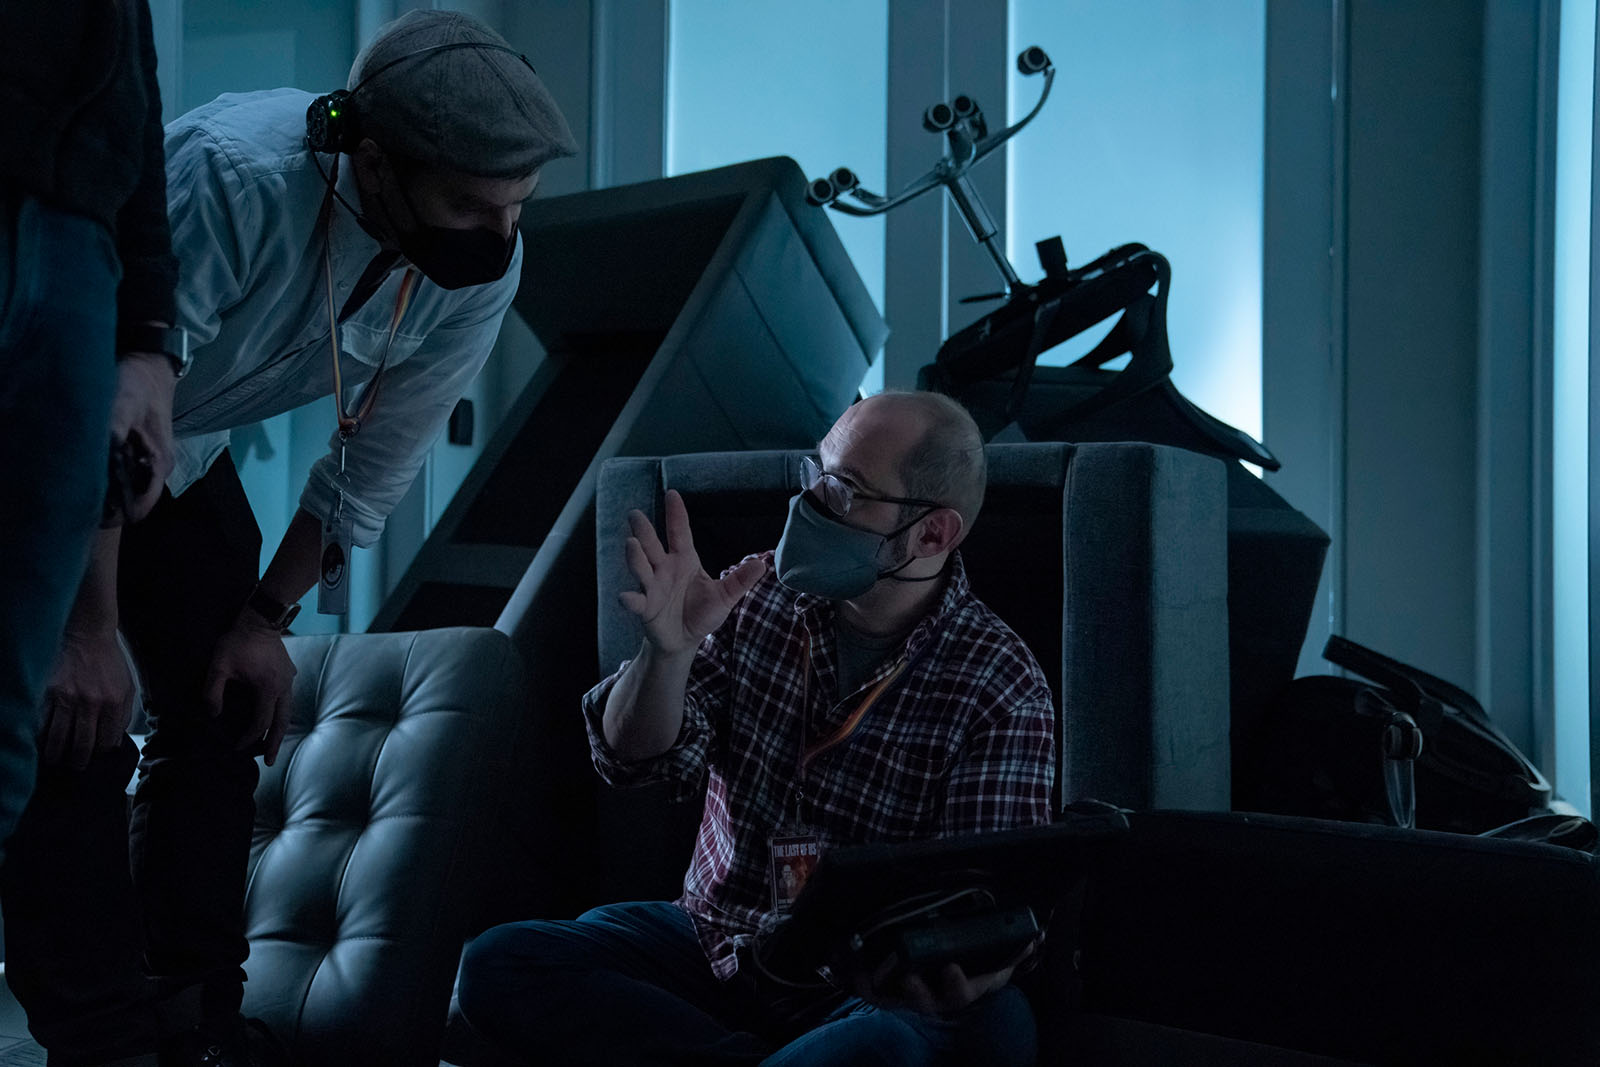 Craig Mazin discusses a shot with DP Eben Bolter, BSC. Image © HBO